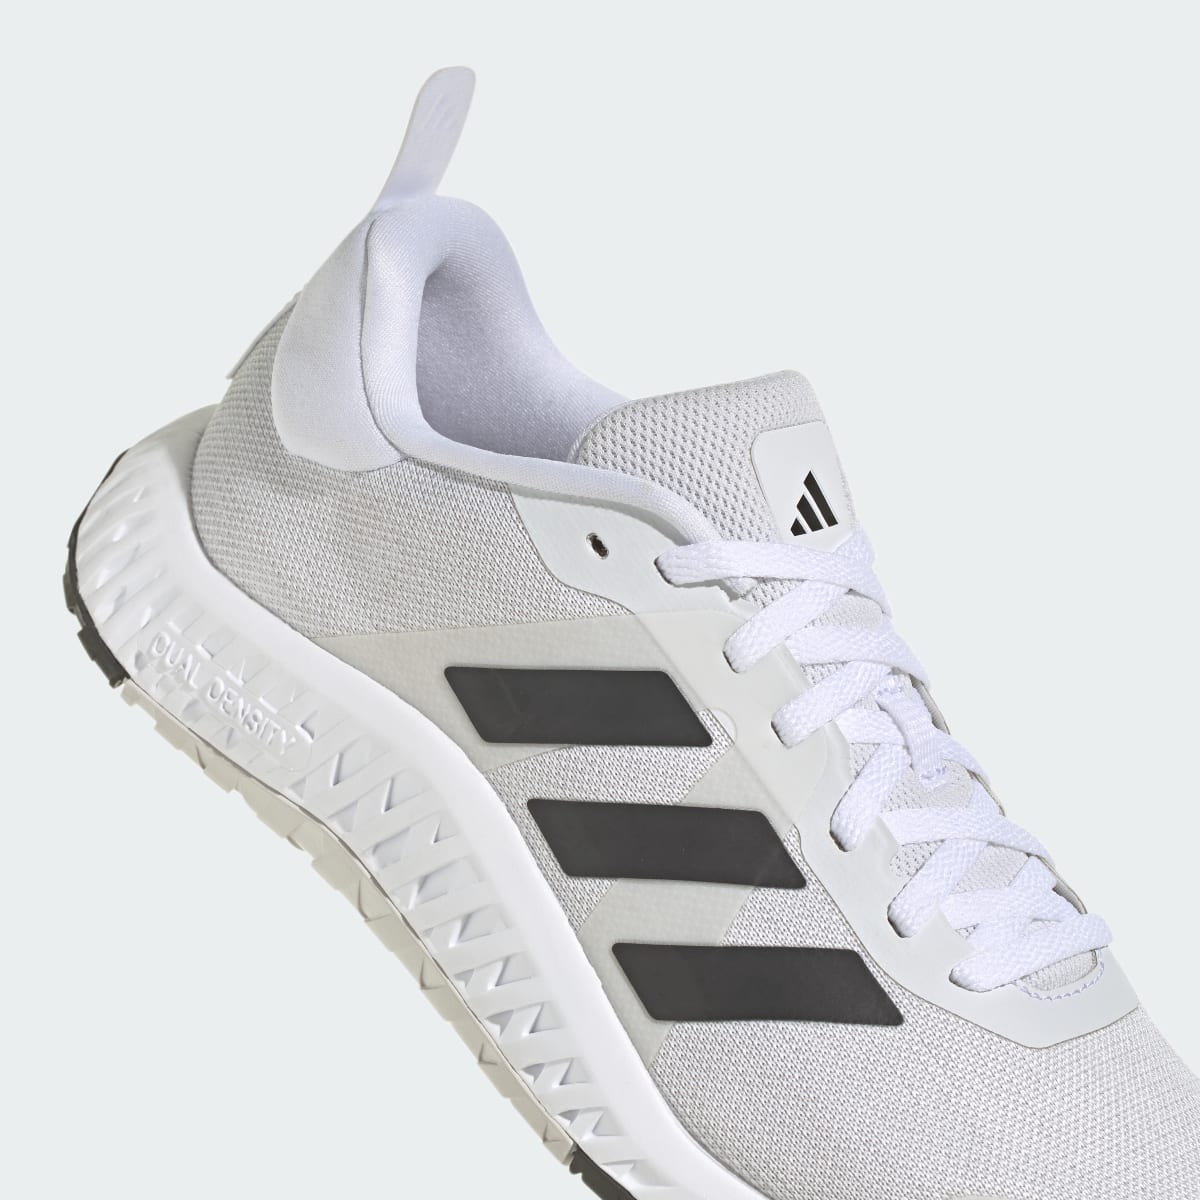 Adidas Everyset Trainer Shoes. 9